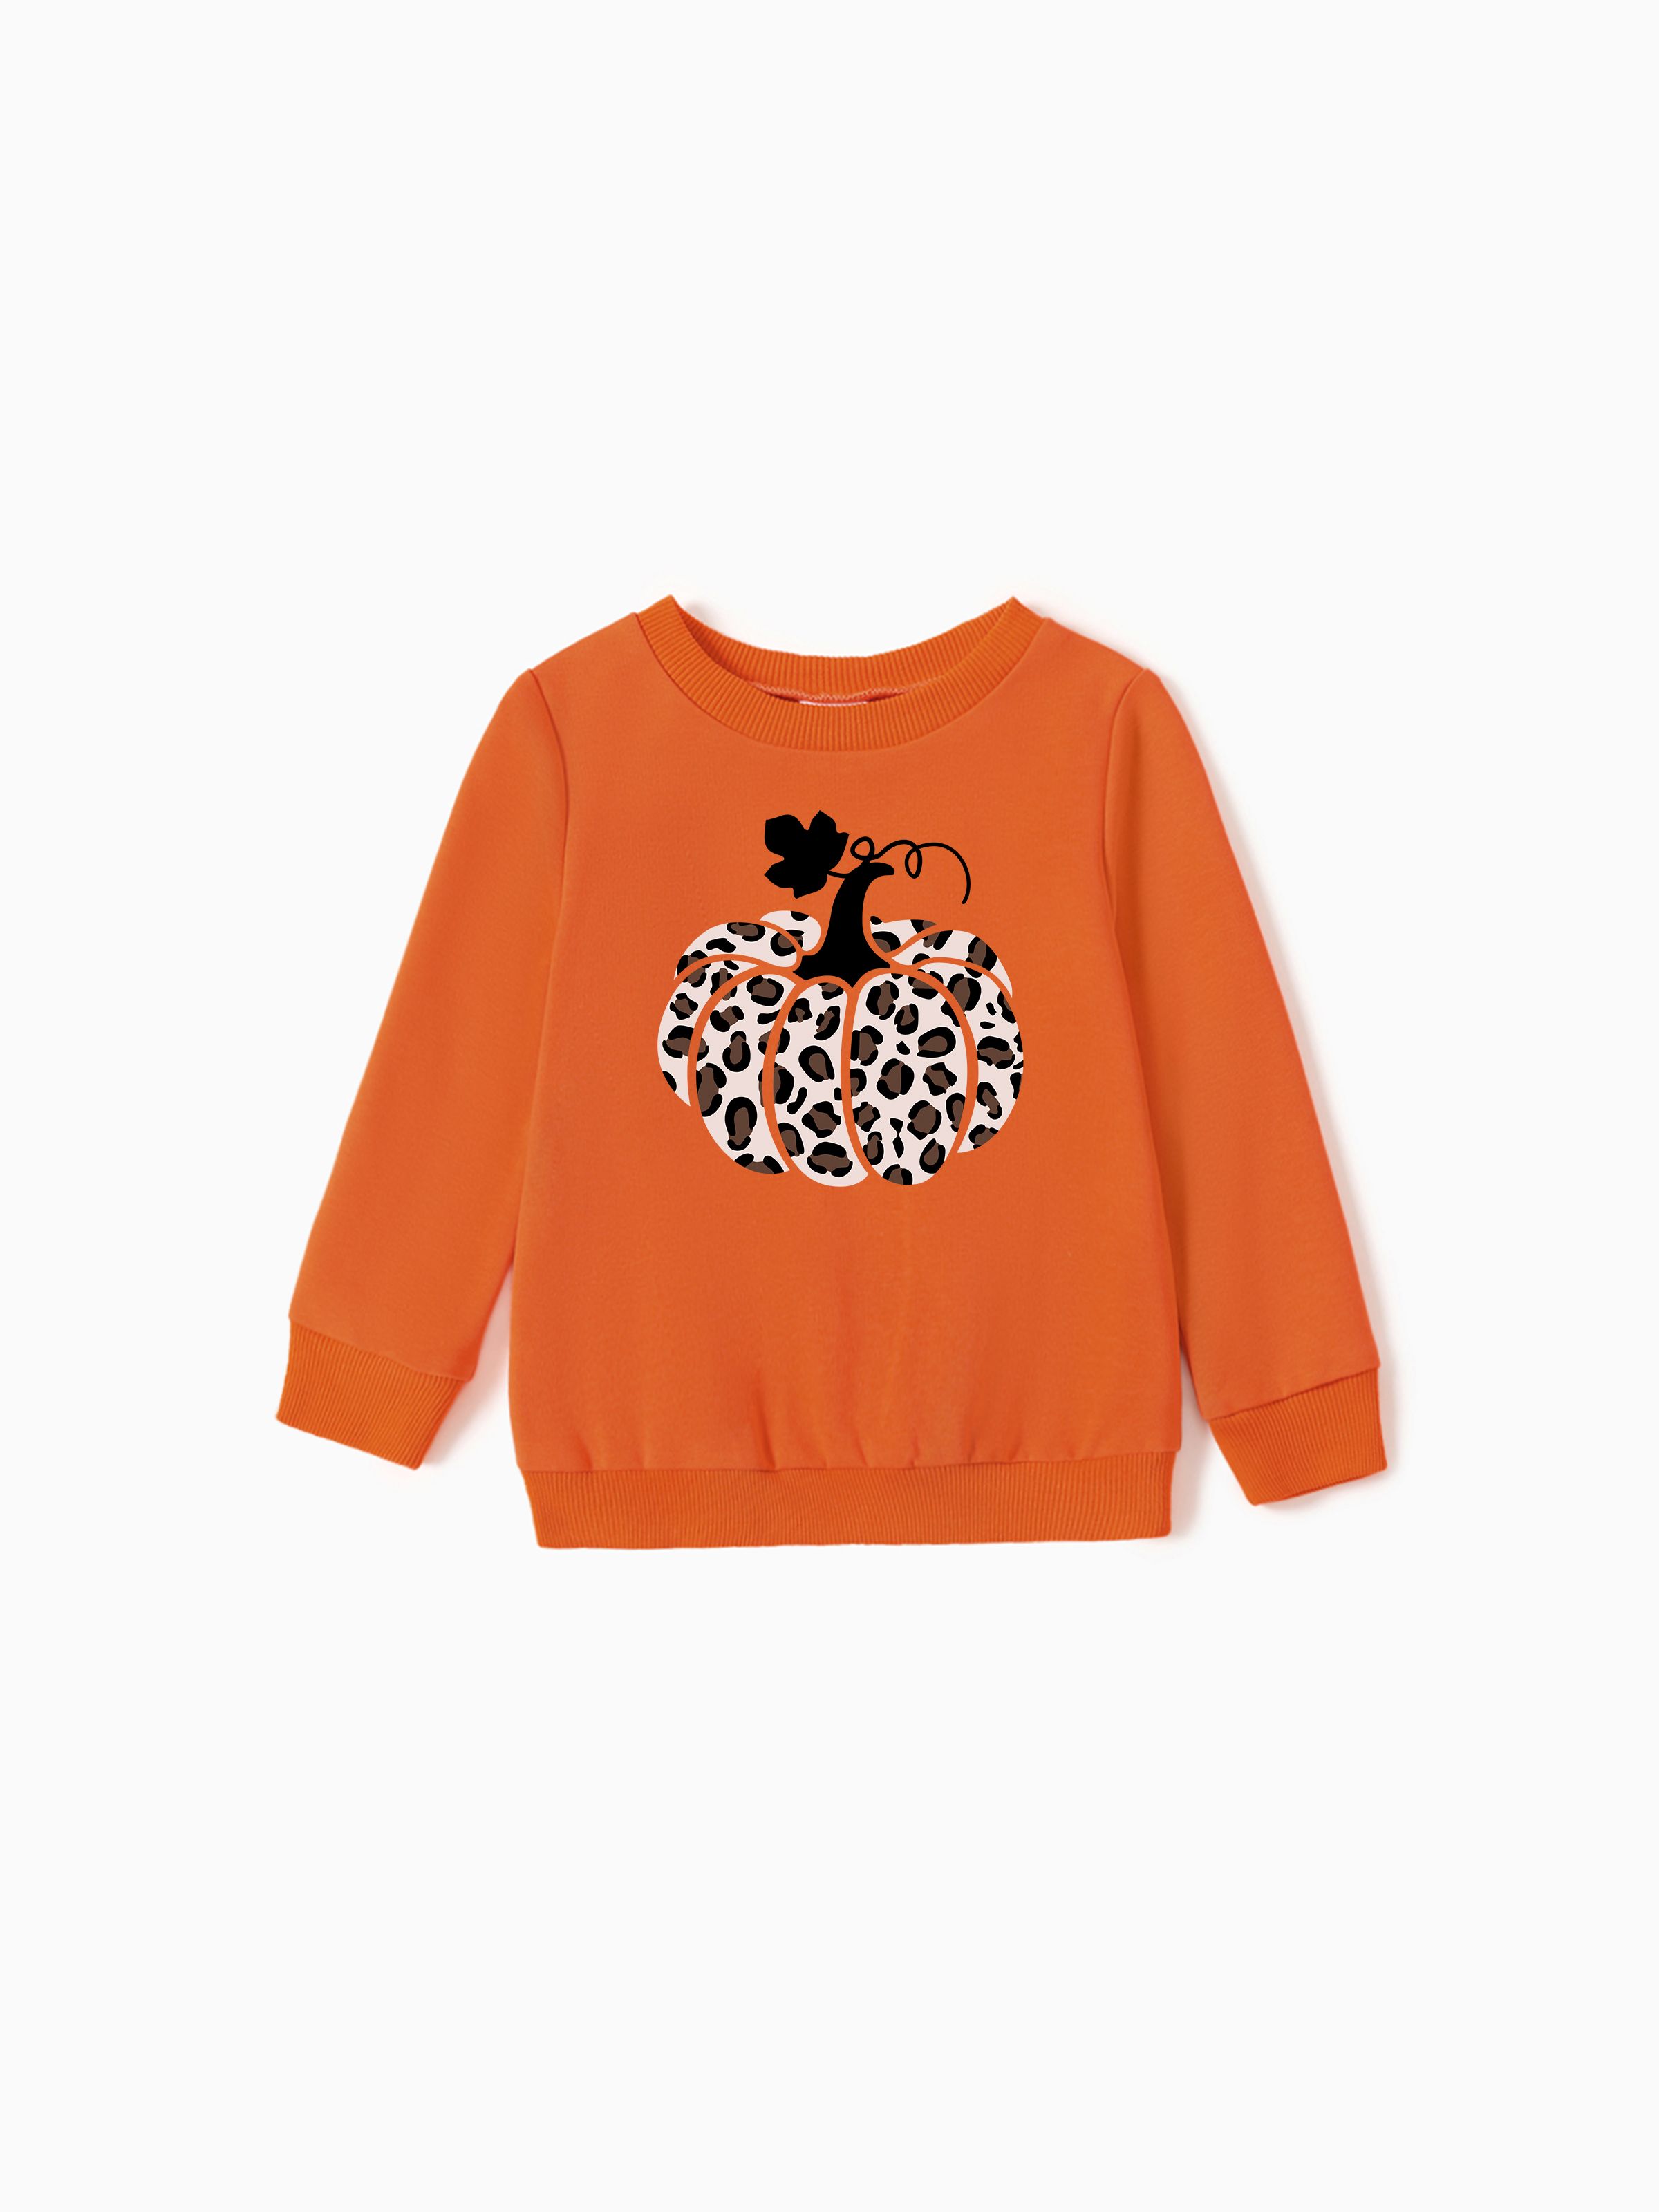 

Halloween Mommy and Me Matching Long Sleeves Leopard-Print Pumpkin Graphic Tops